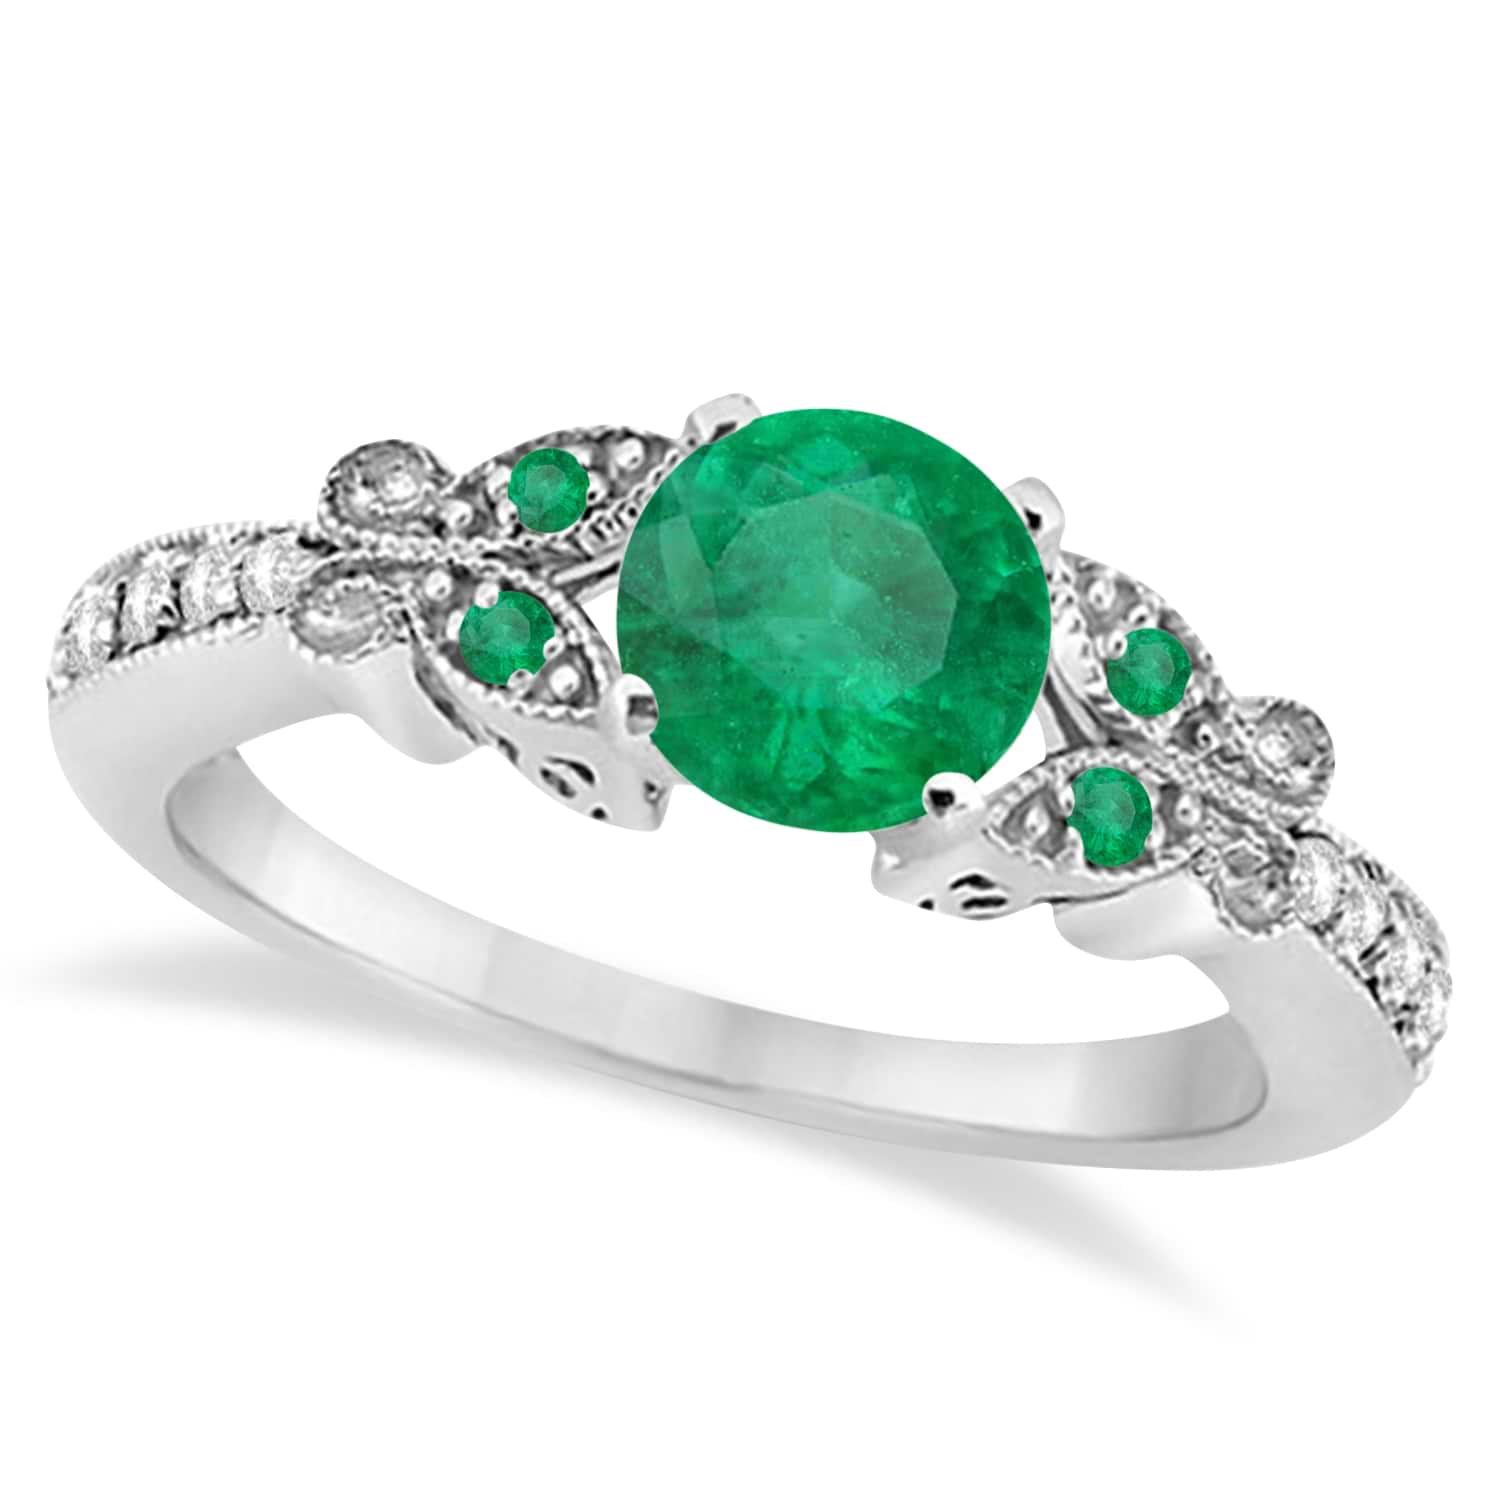 Butterfly Genuine Emerald & Diamond Engagement Ring 18K White Gold (1.91ct)